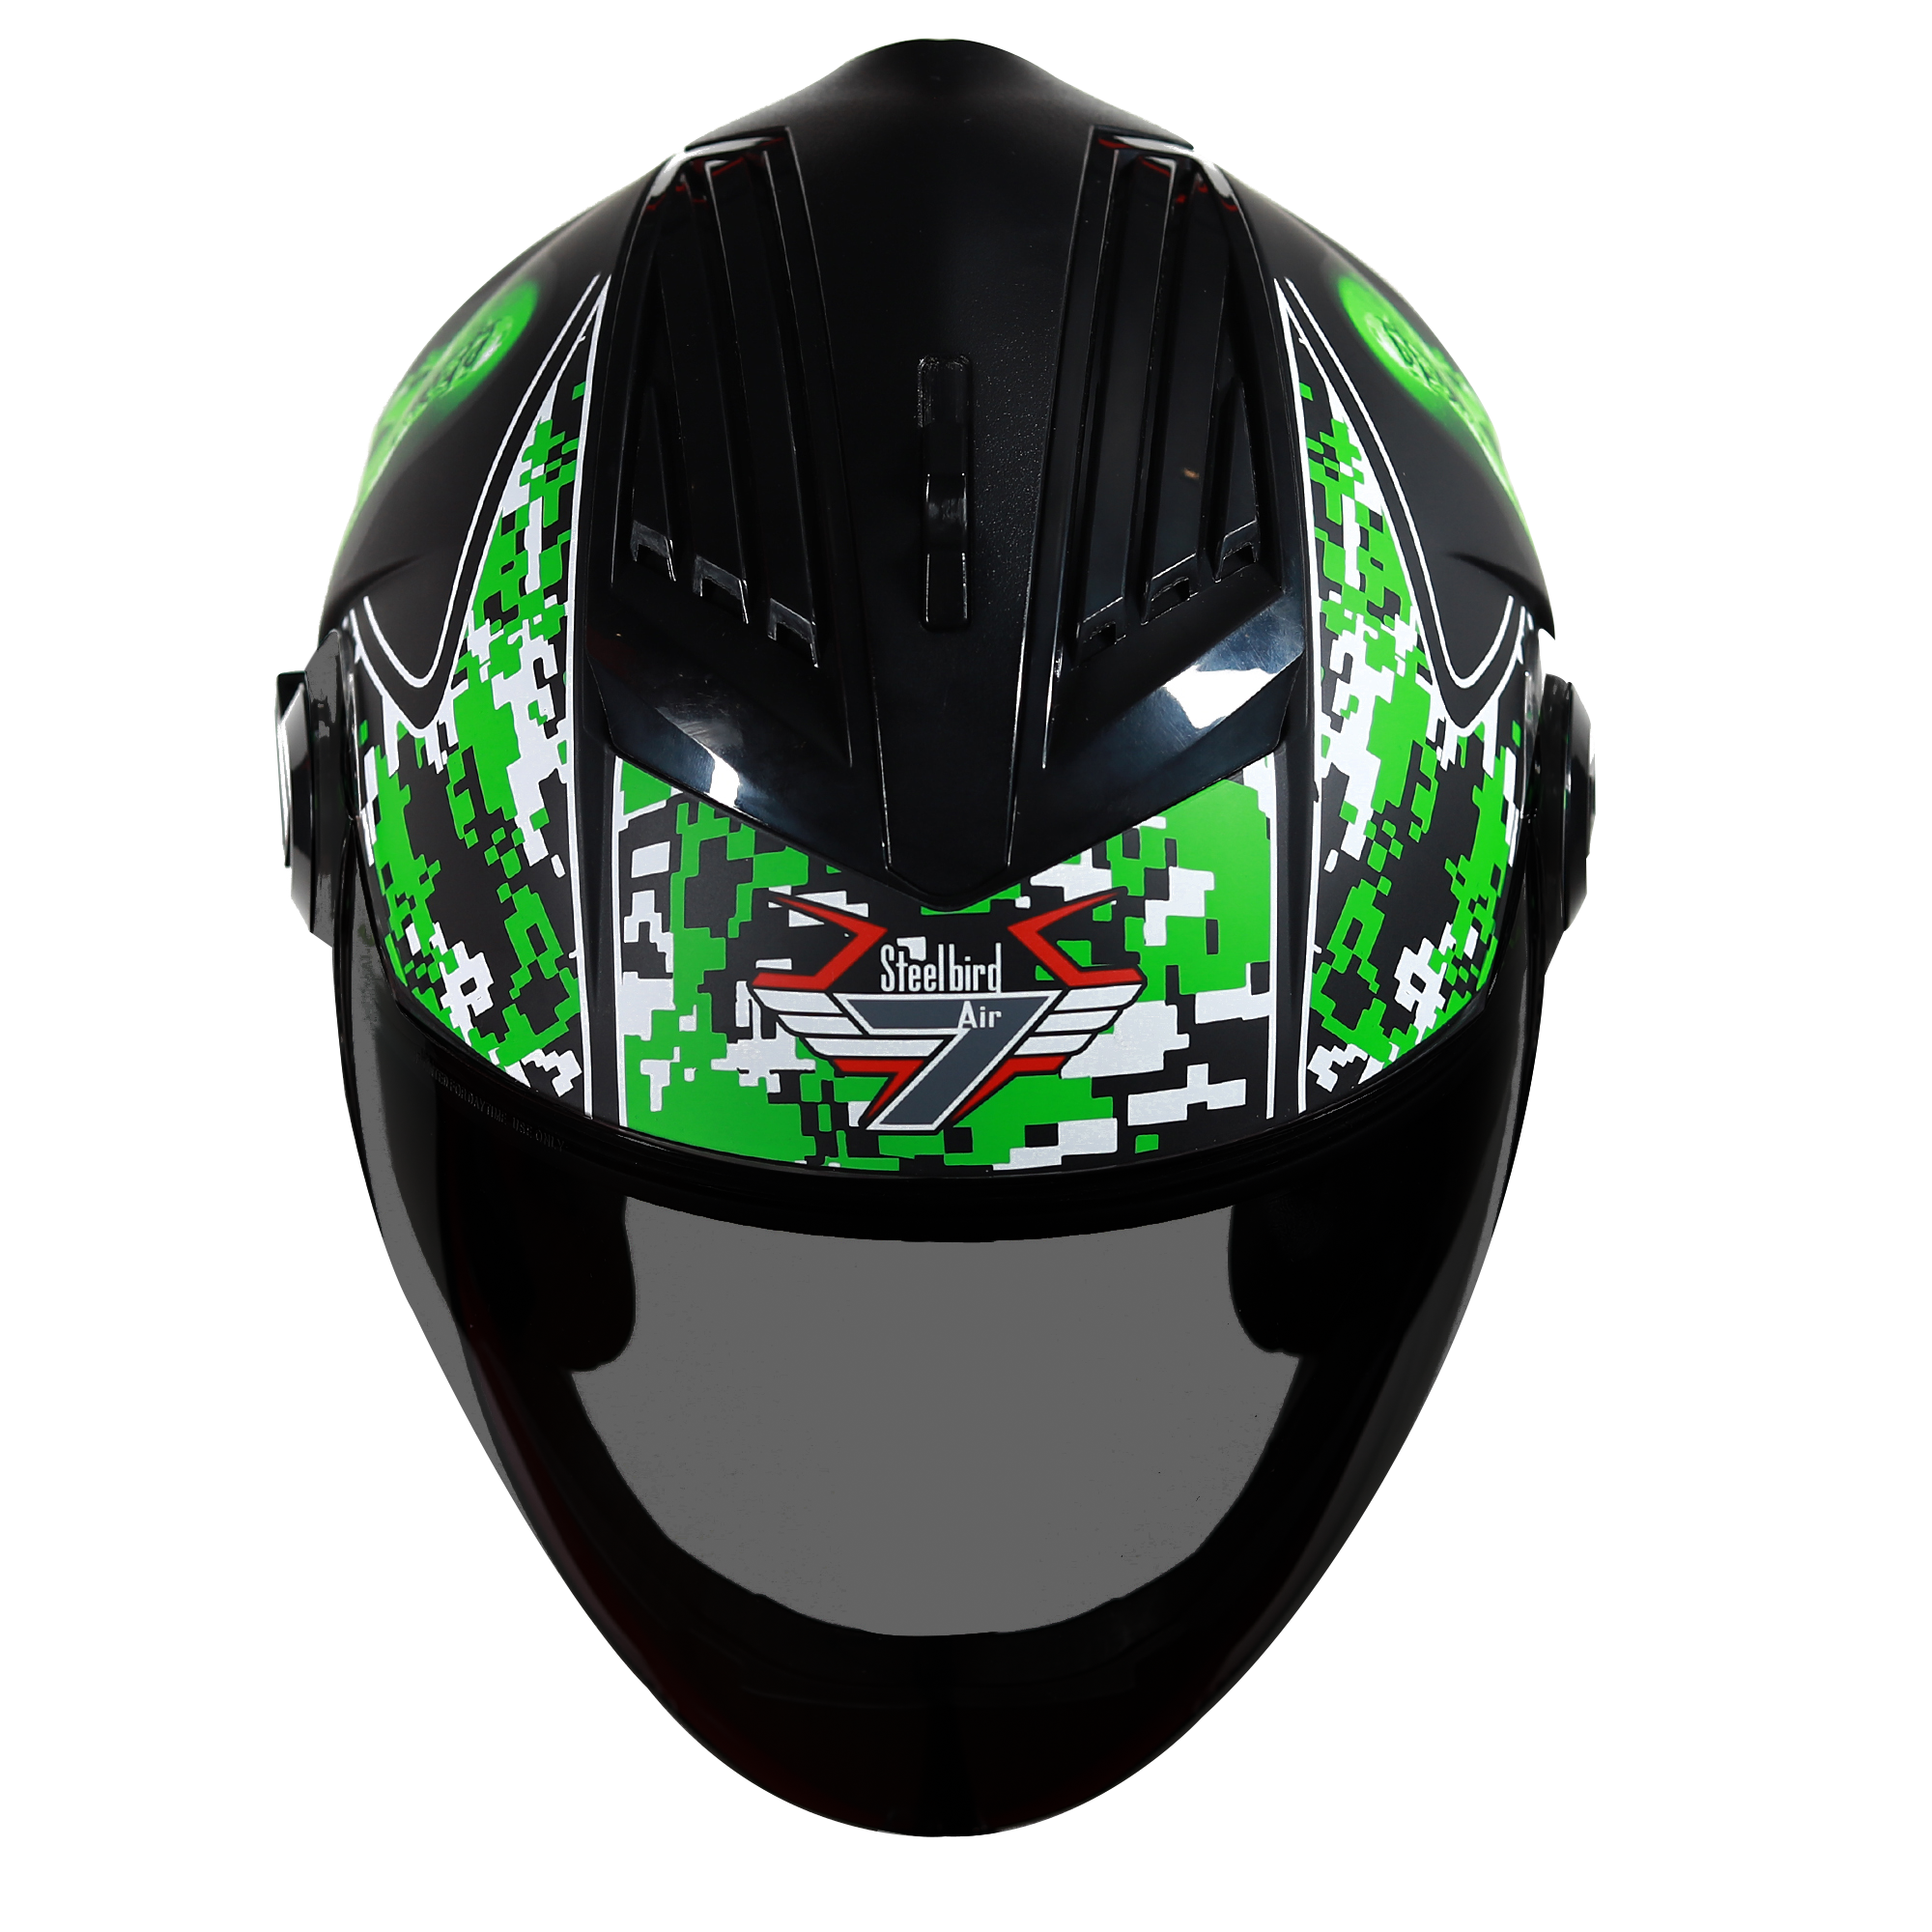 SBA-2 Marine Mat Black With Green ( Fitted With Clear Visor  Extra Rainbow Chrome Visor Free)